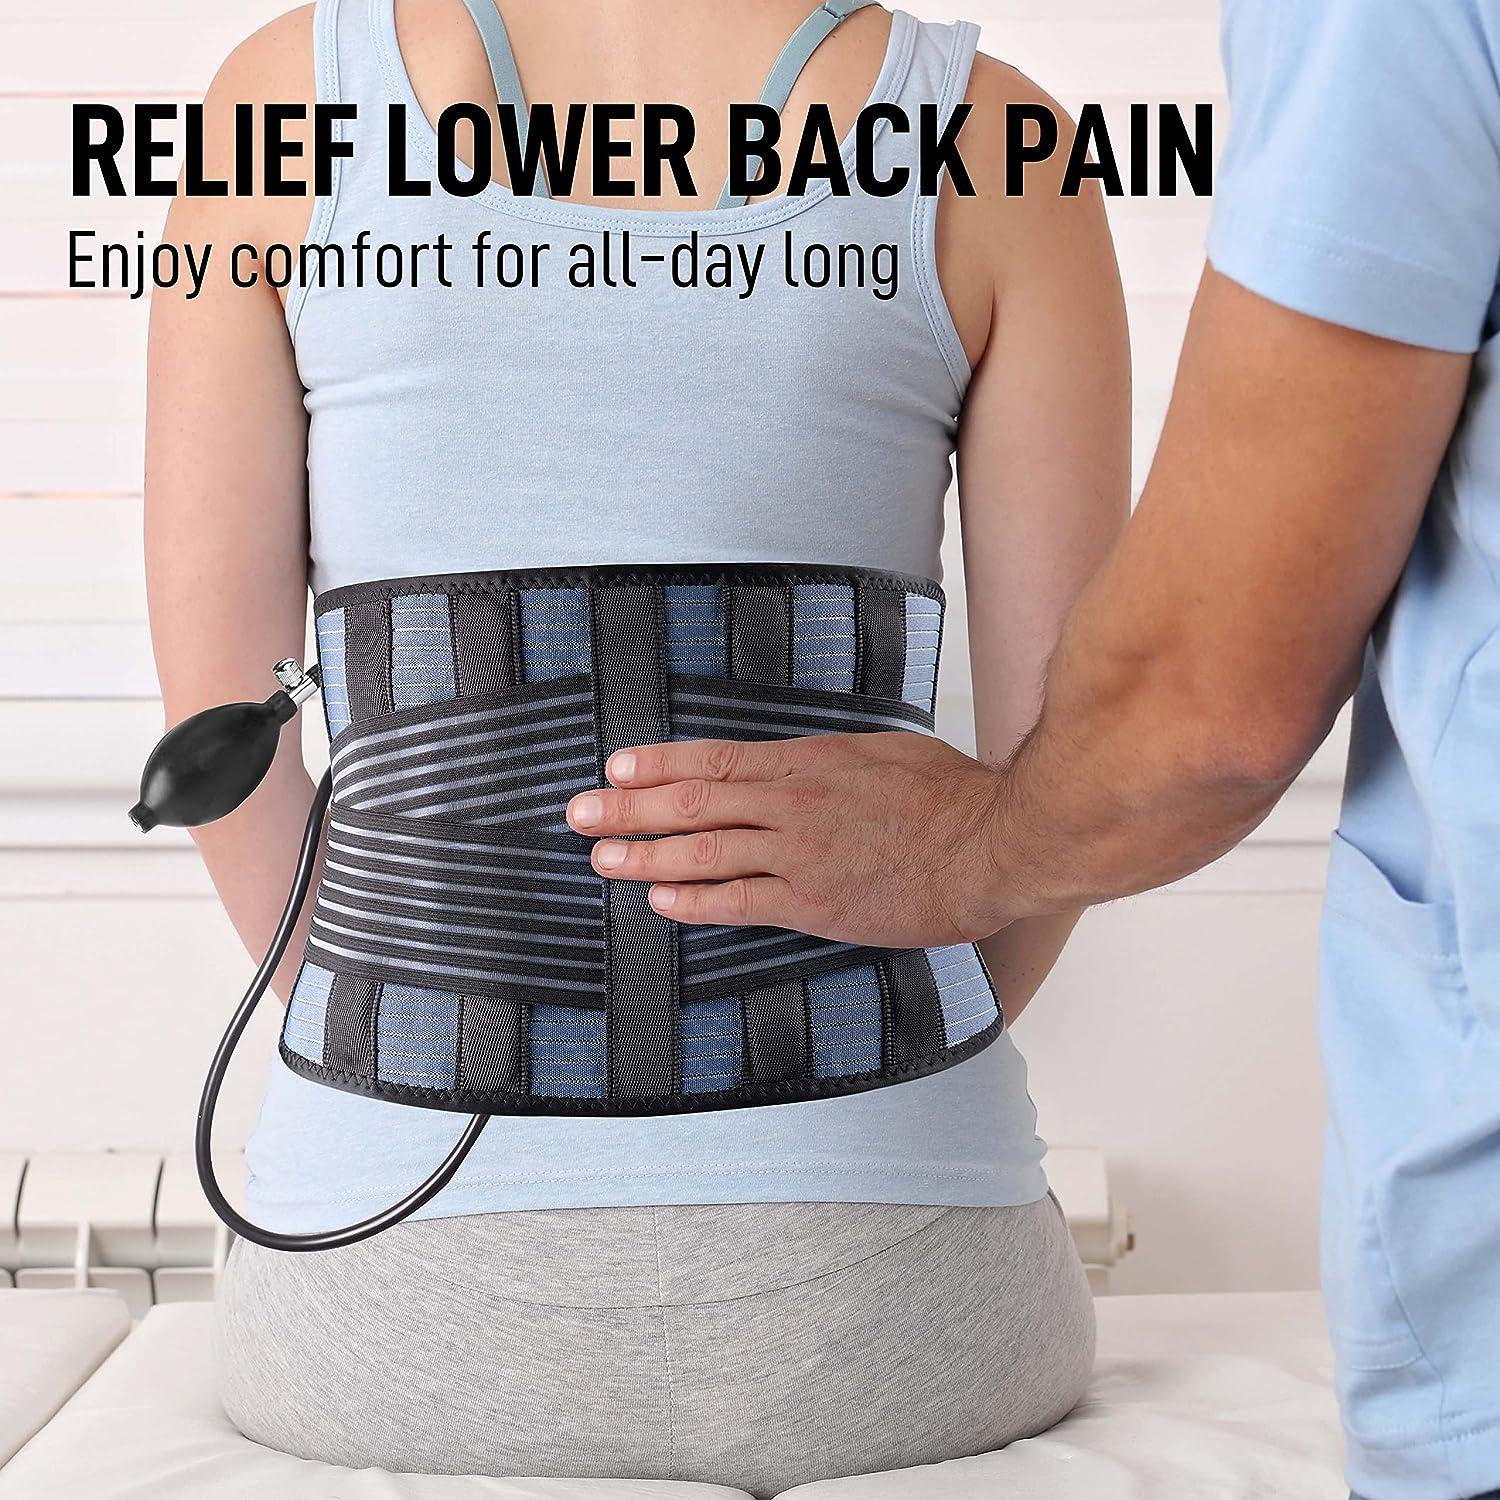 FEATOL Back Brace with Inflatable Pad for Men Women Lower Back Pain Relief  Back Support Belt for Work Heavy Lifting Breathable Lightweight Lumbar  Support Belt for Sciatica Scoliosis Herniated Disc XXL fits